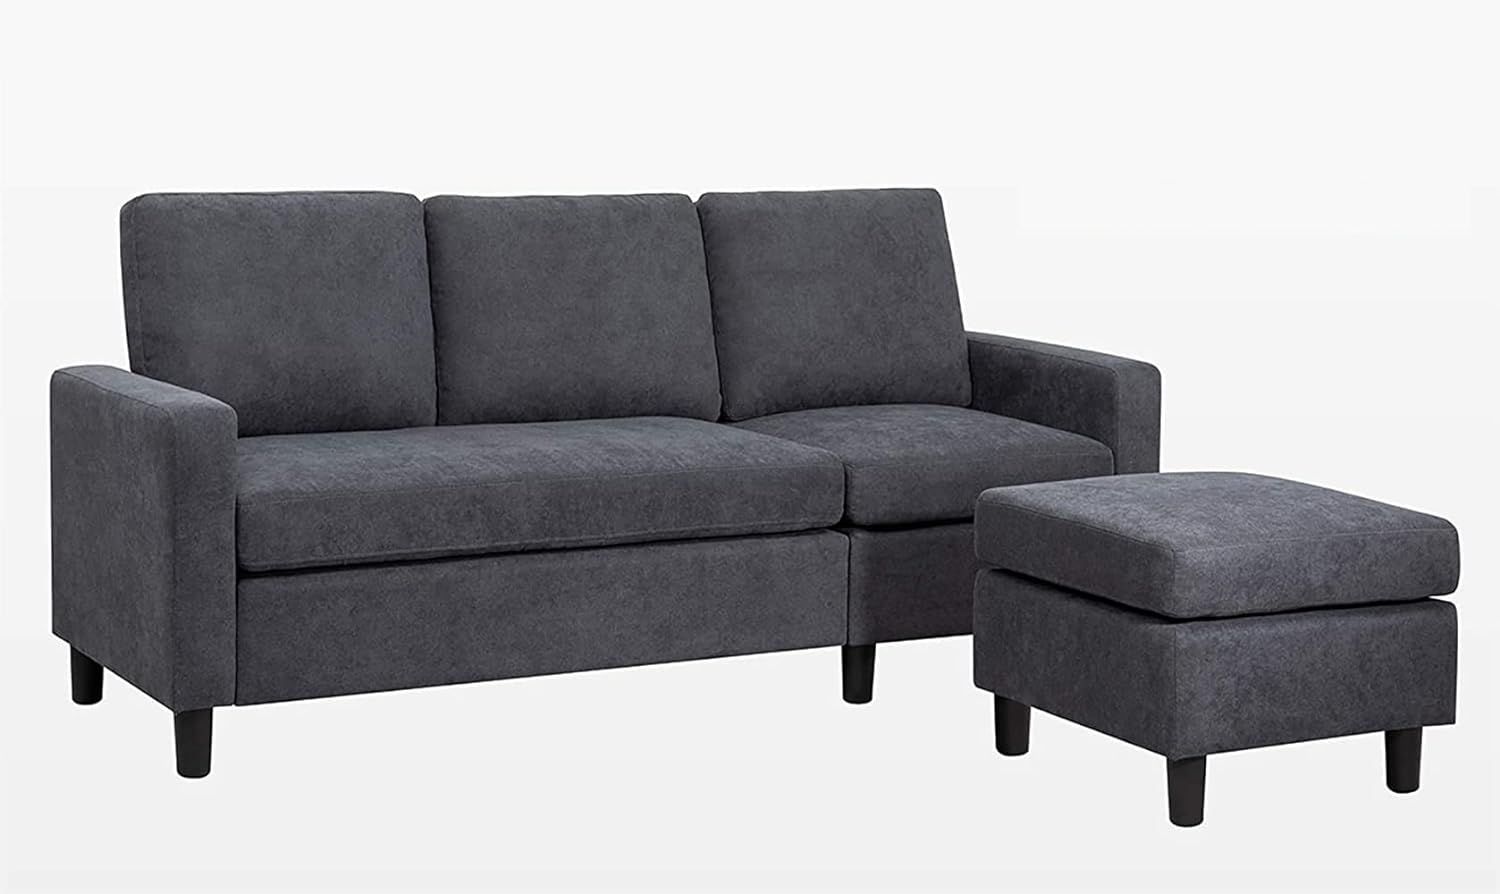 Convertible Modular Sofa 3 Seat L Shaped Sofa, India | Ubuy Inside 3 Seat L Shaped Sofas In Black (View 15 of 15)